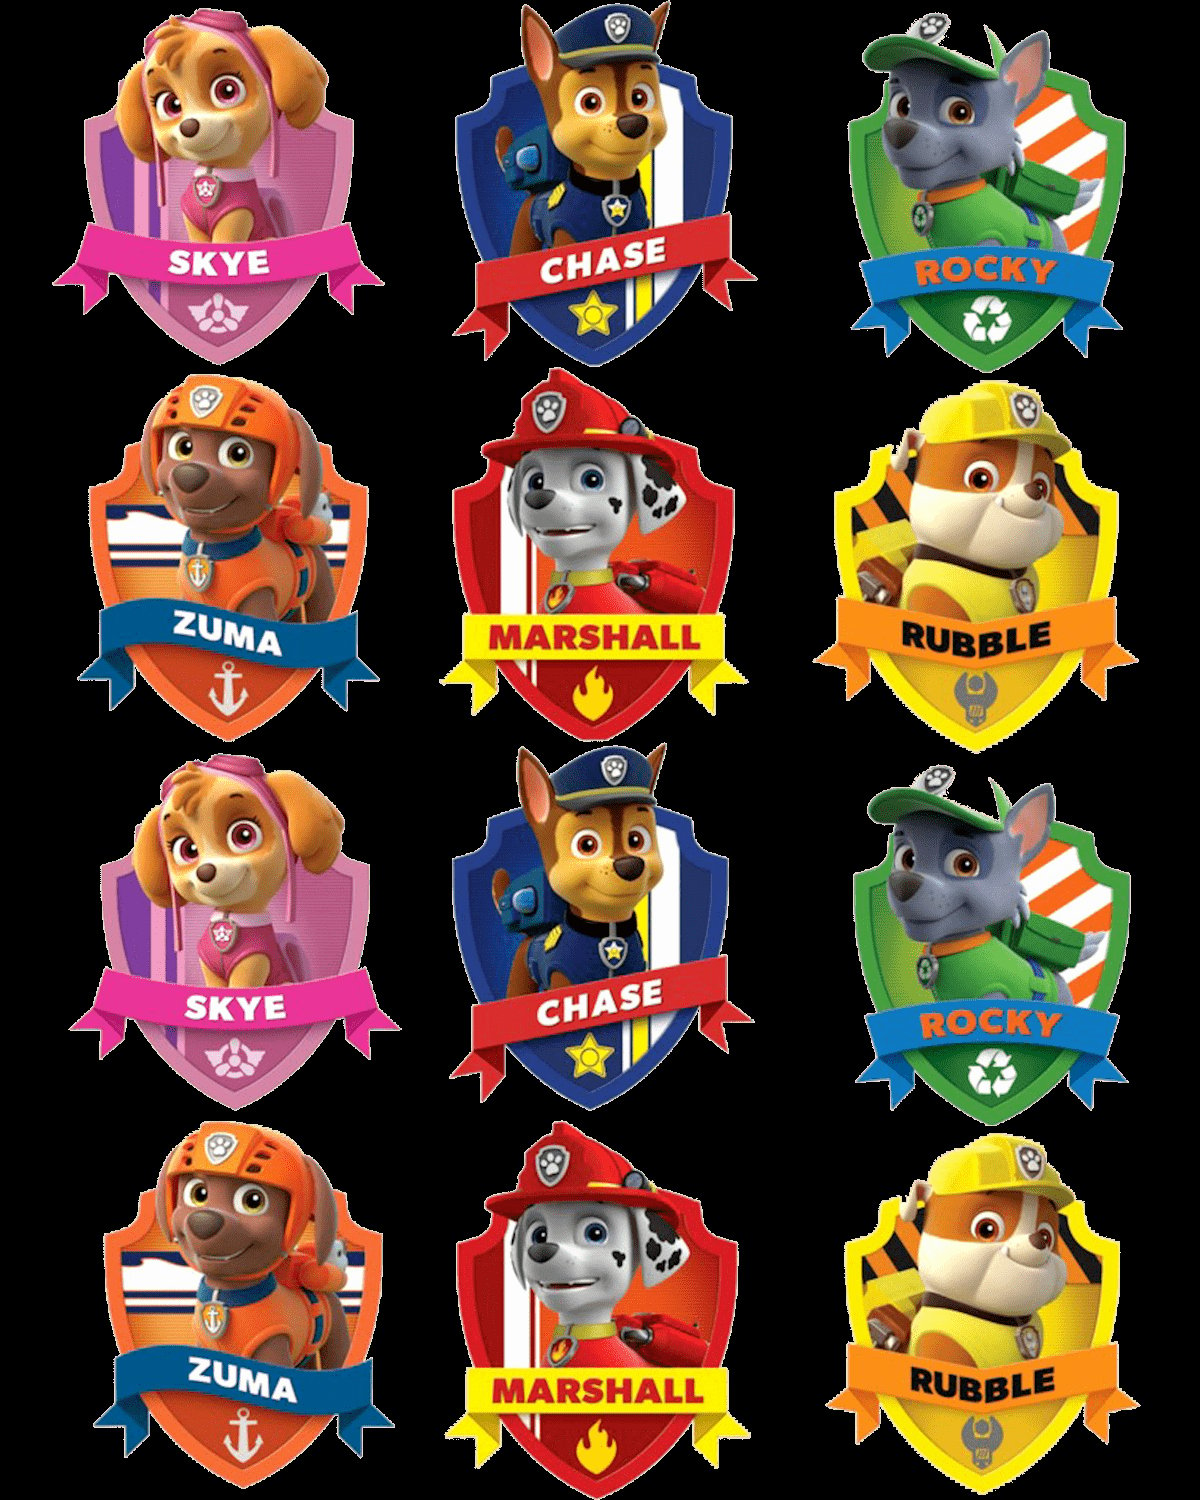 Gallery Of High Resolution Paw Patrol Image Awesome.